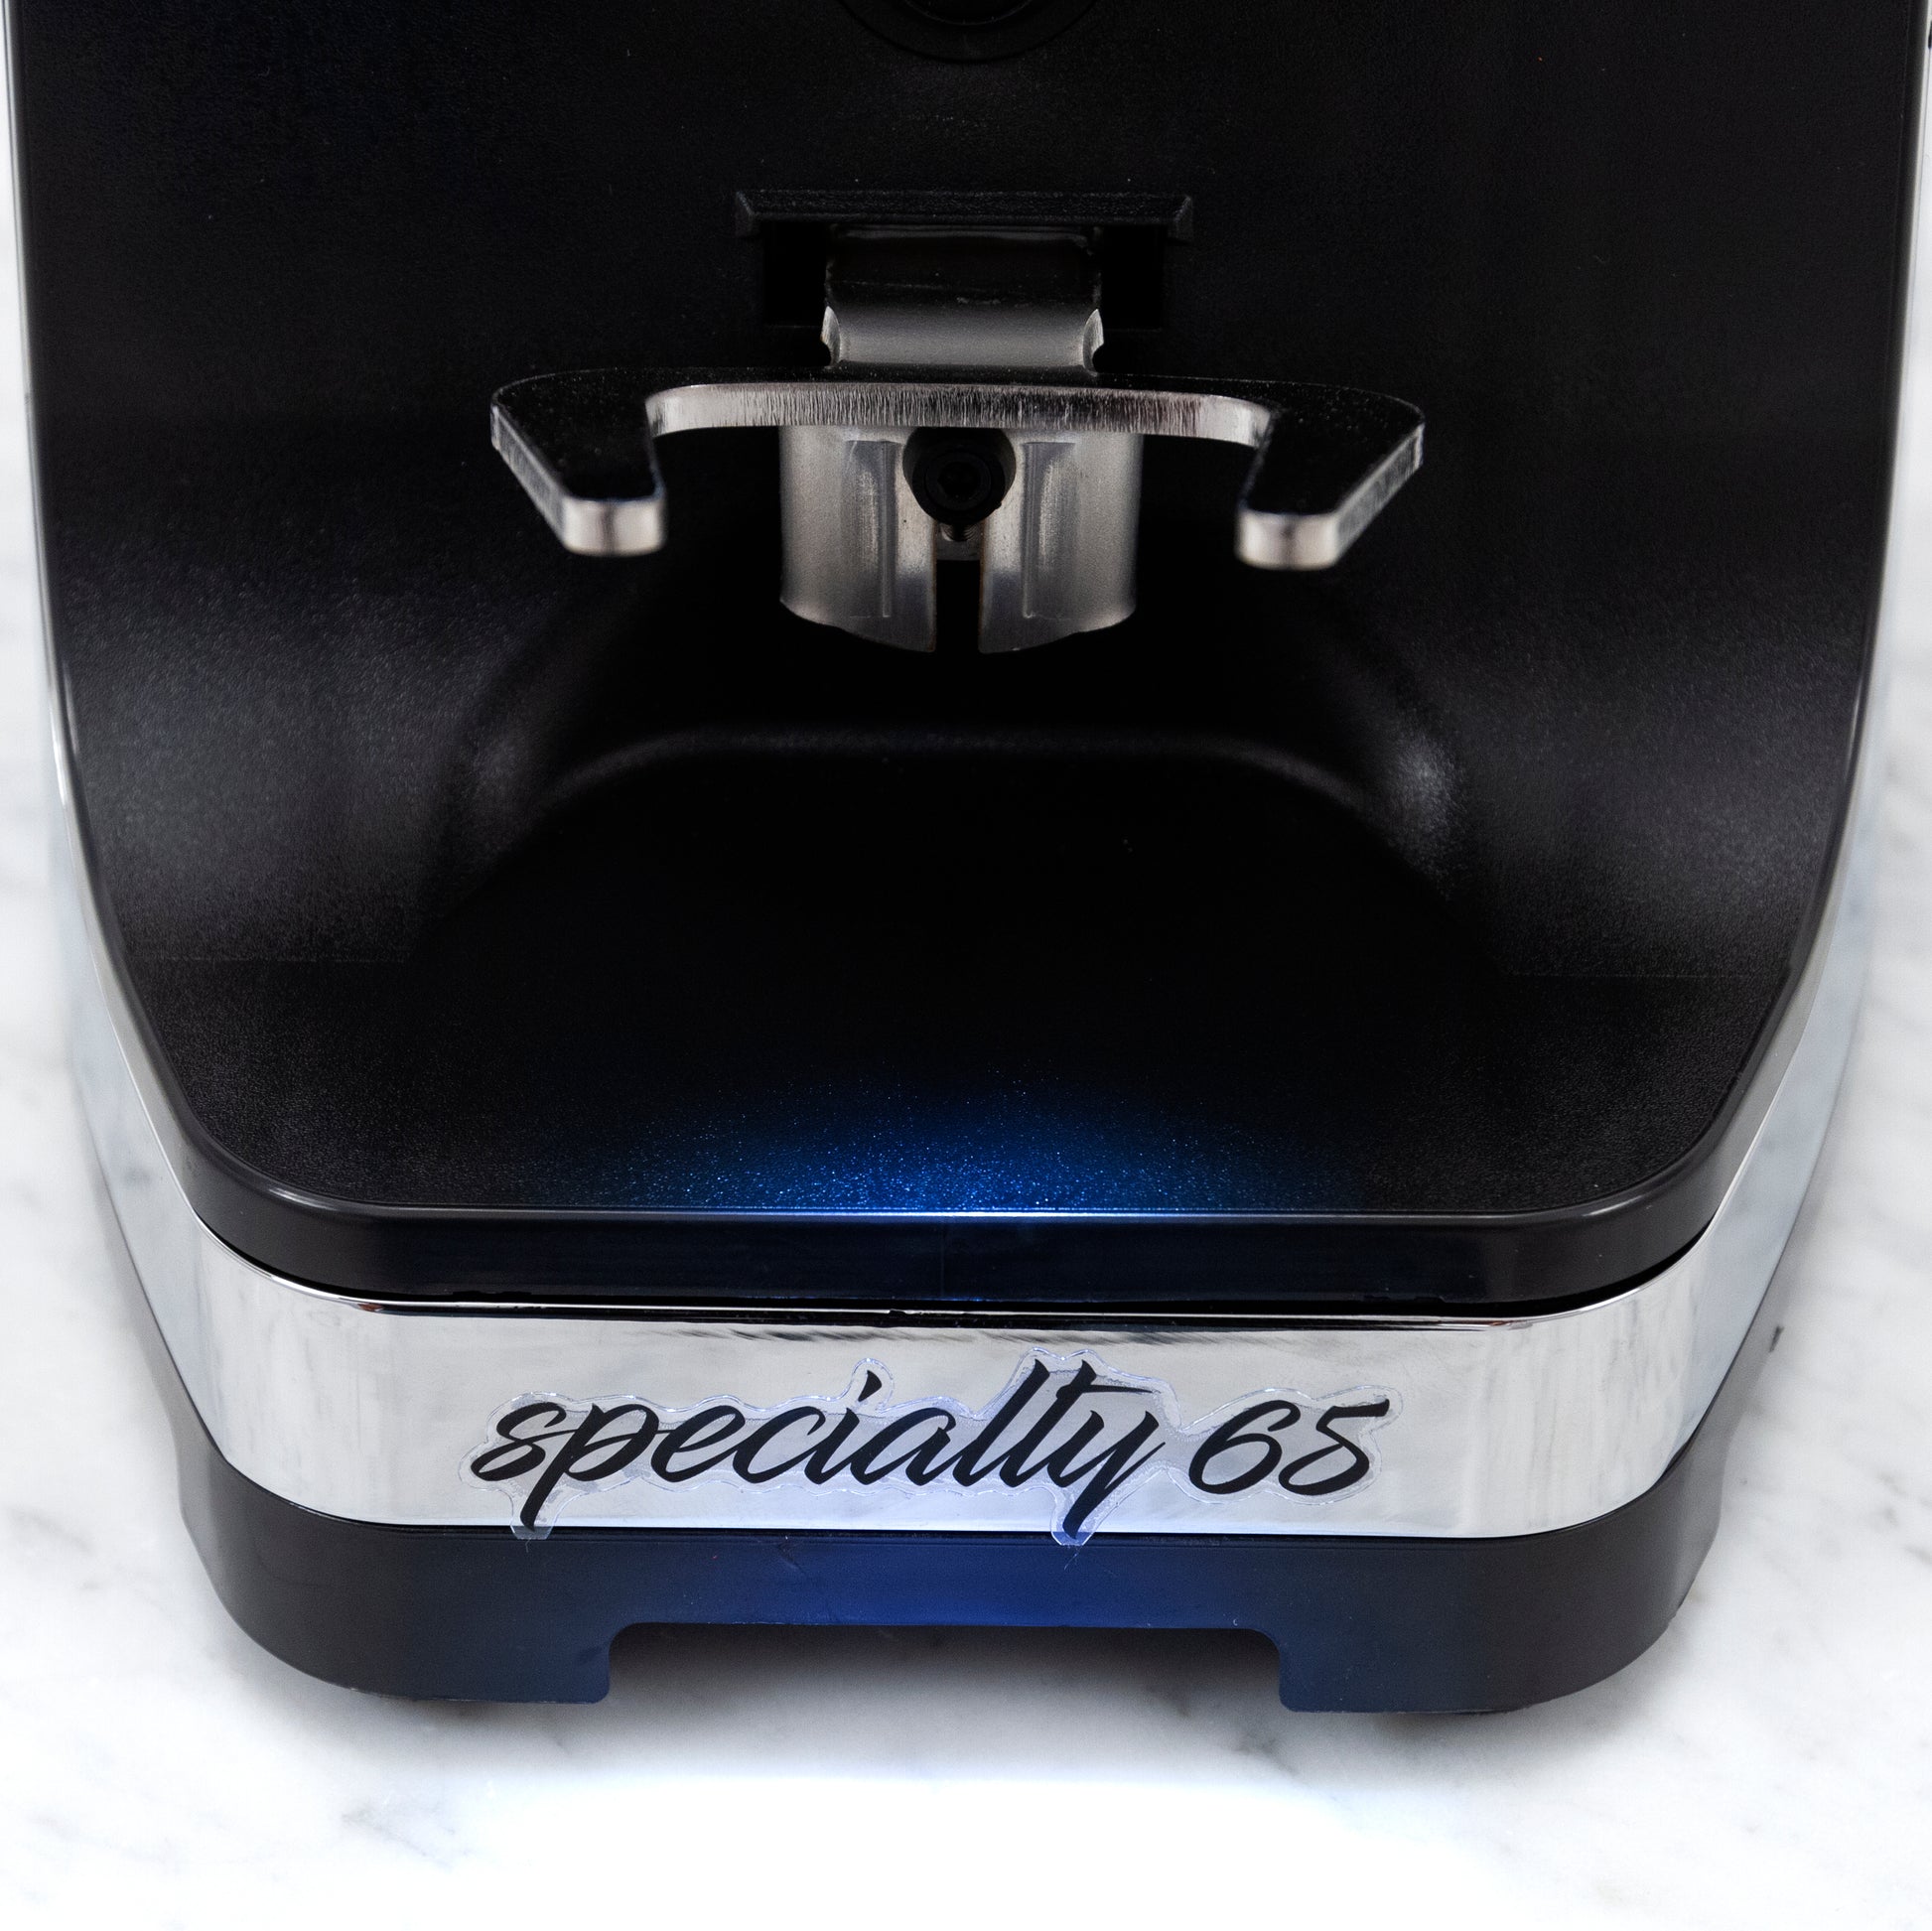 portafilter hooks above the "specialty 65" logo on the base